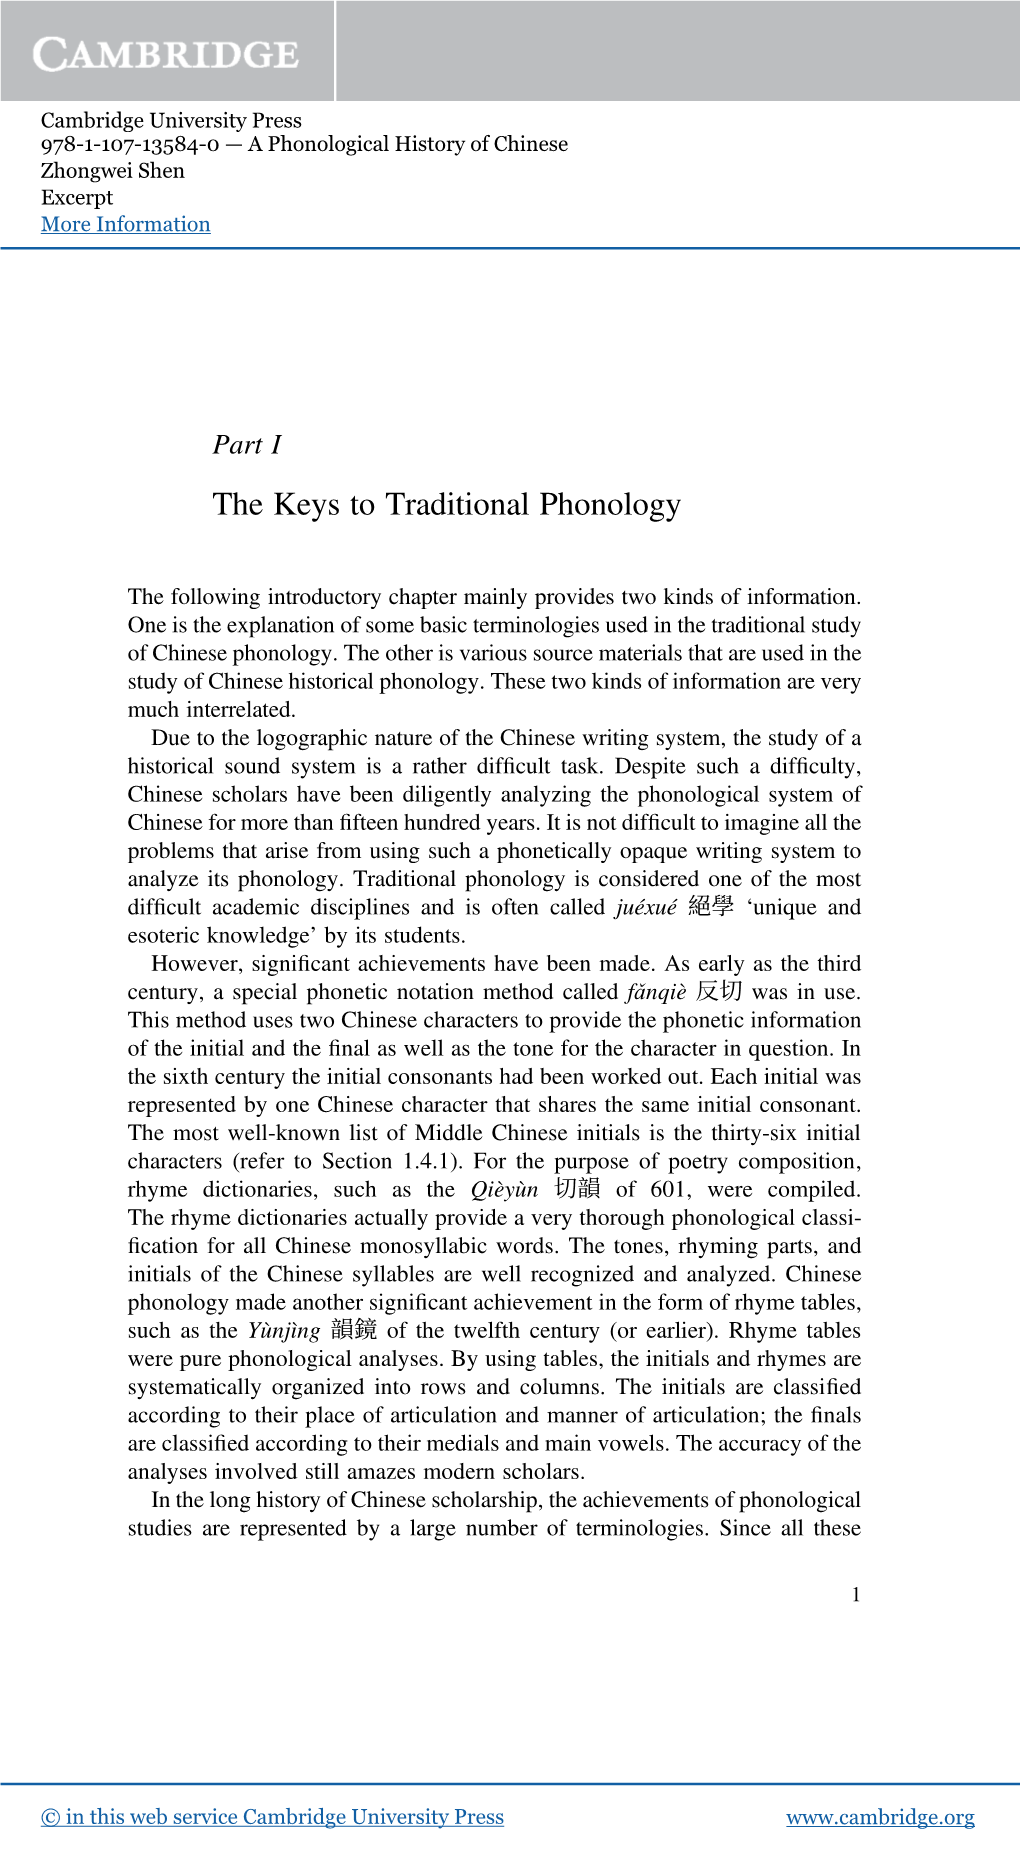 The Keys to Traditional Phonology